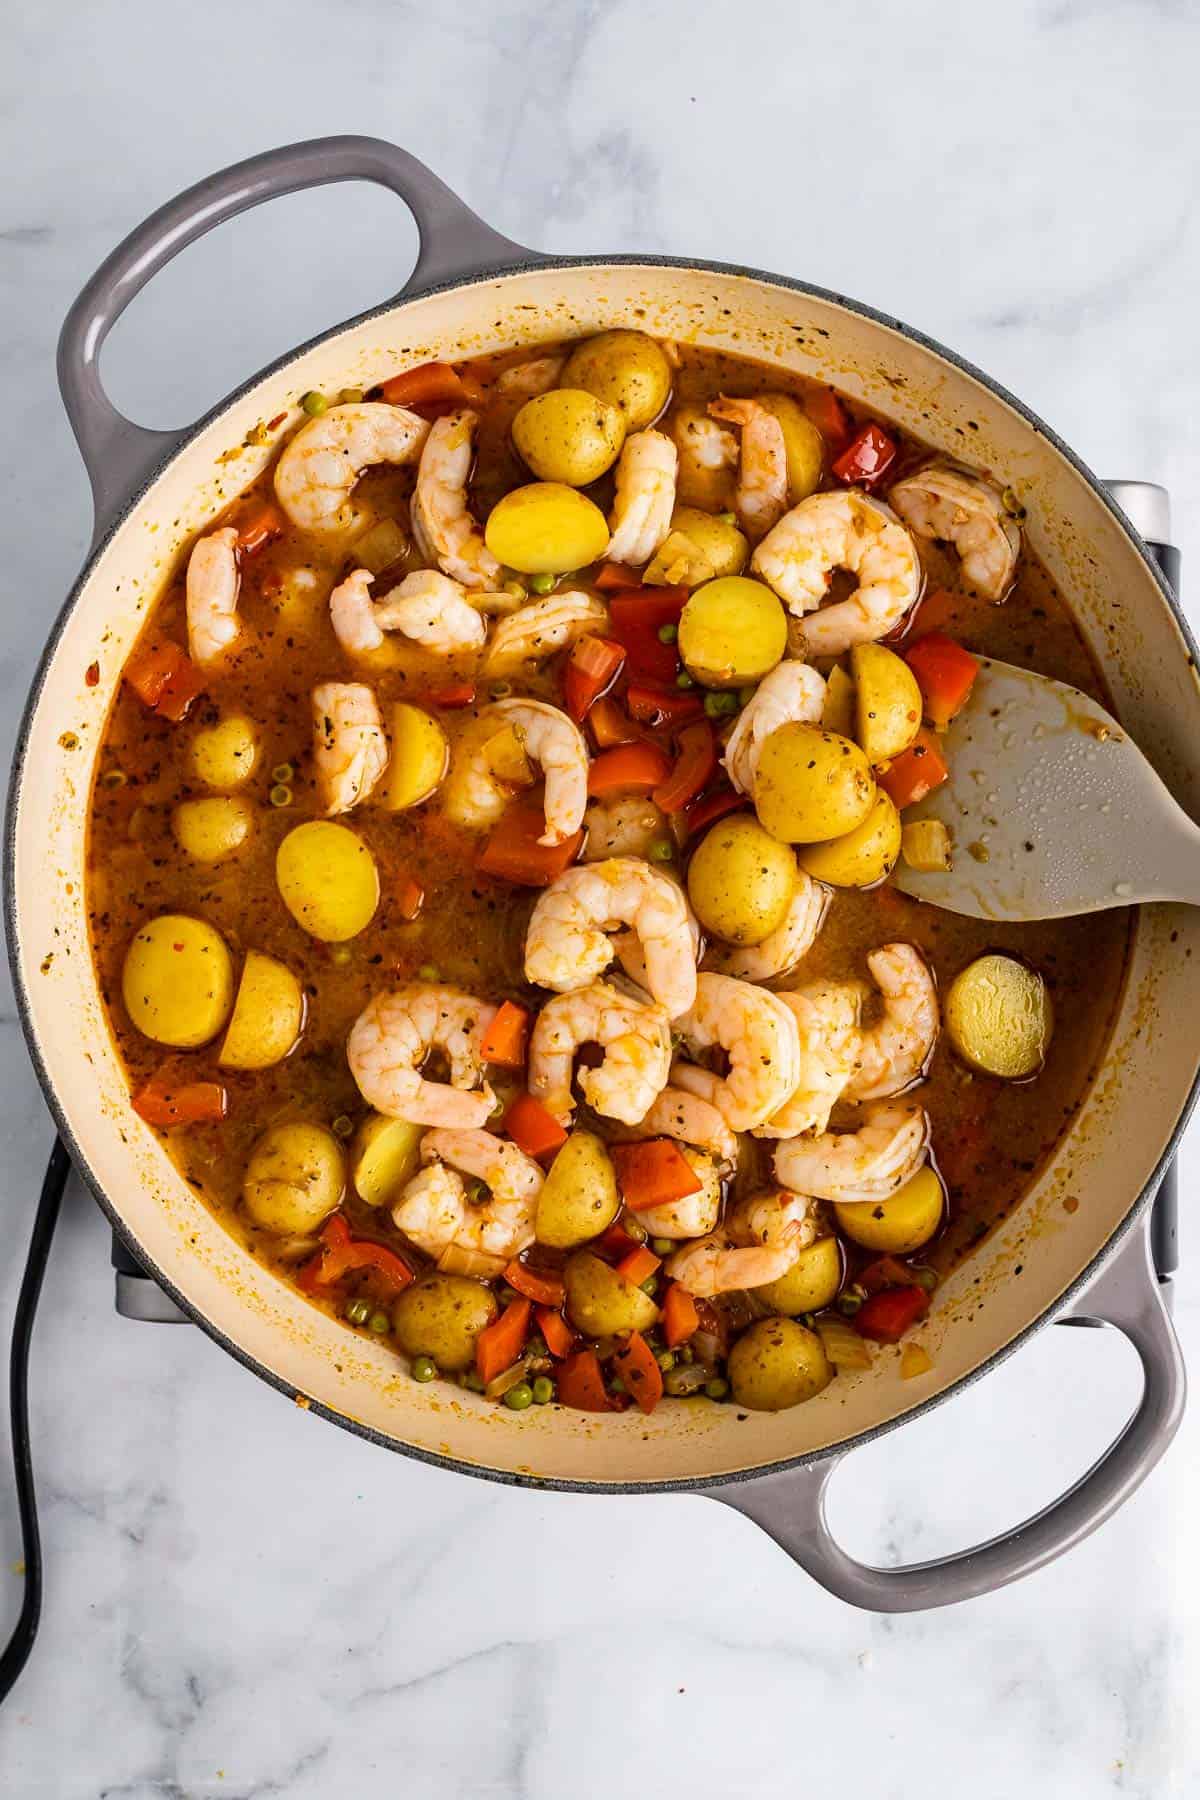 Stew with shrimp in the saucepan as seen from above